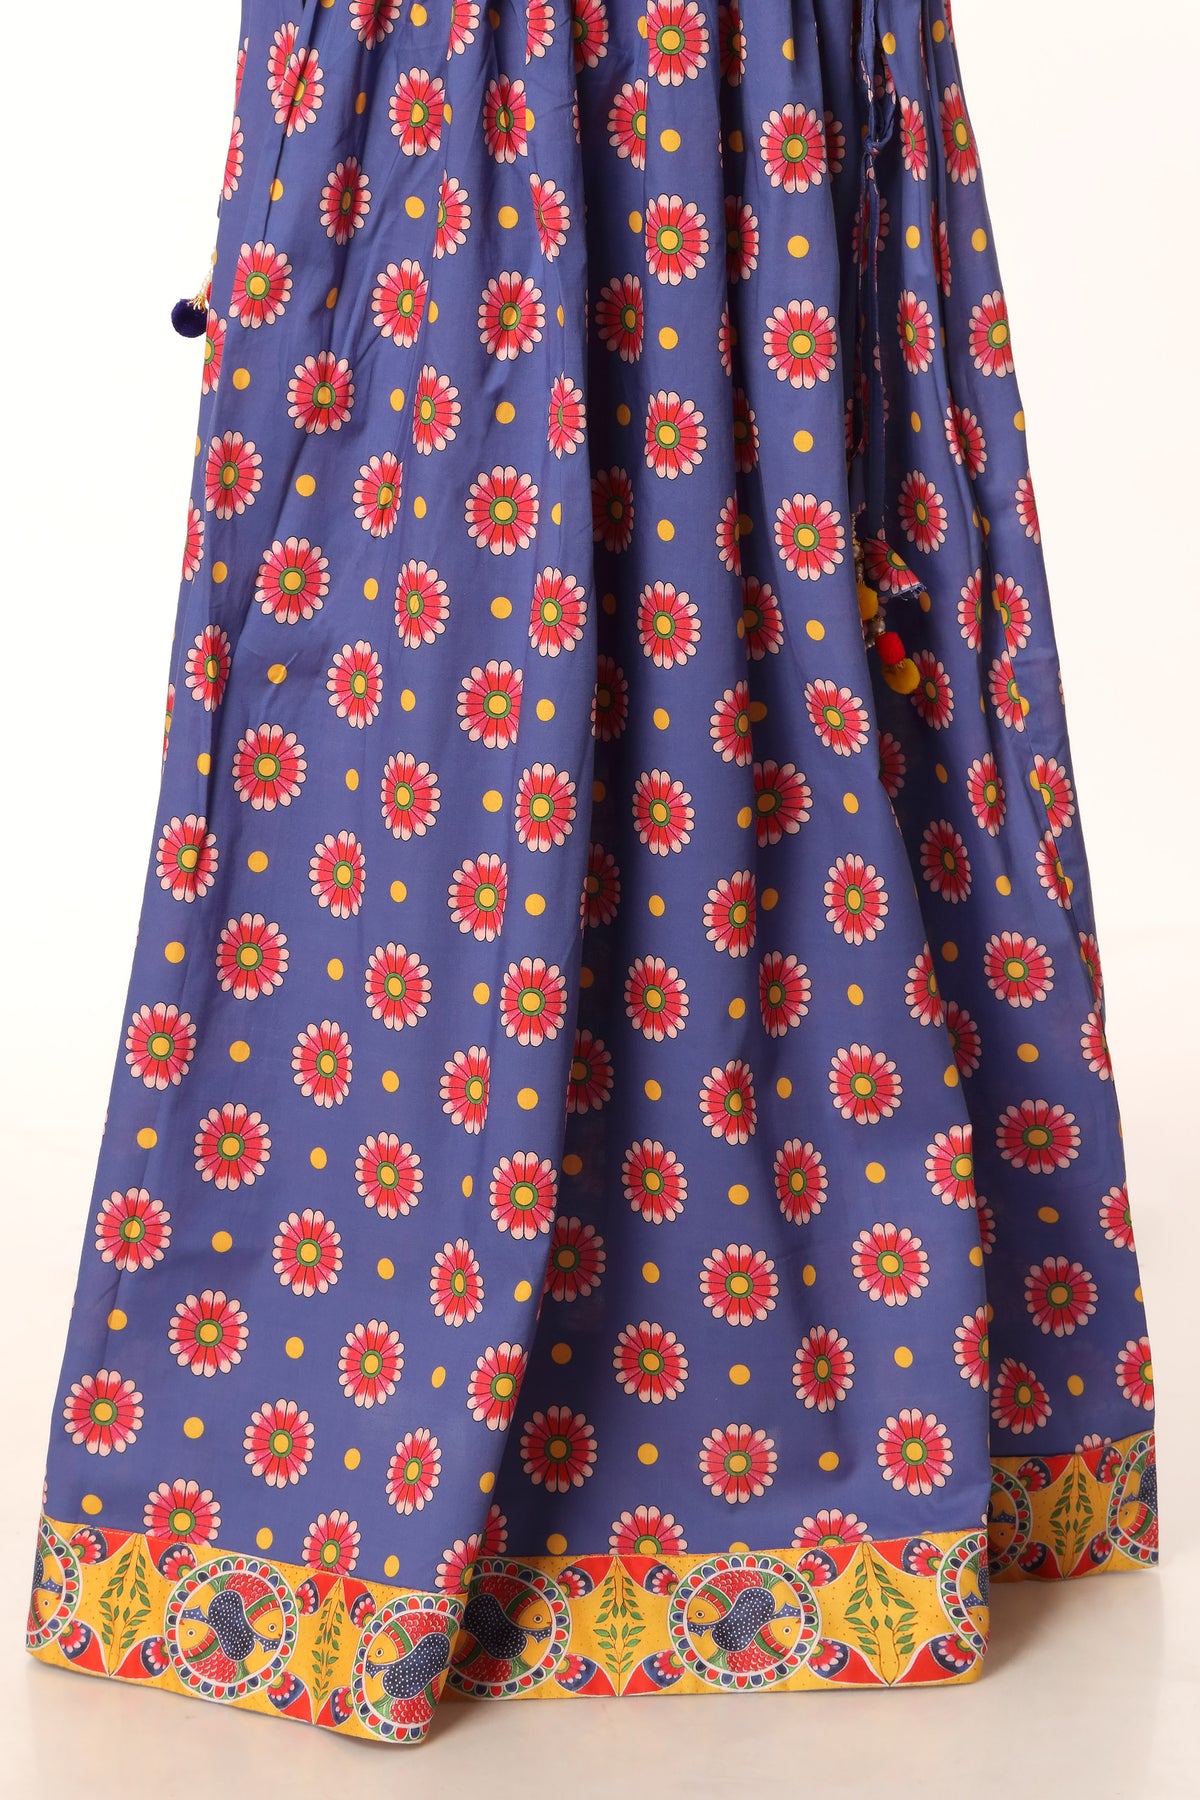 Ditsy Paisley in Multi coloured Printed Lawn fabric